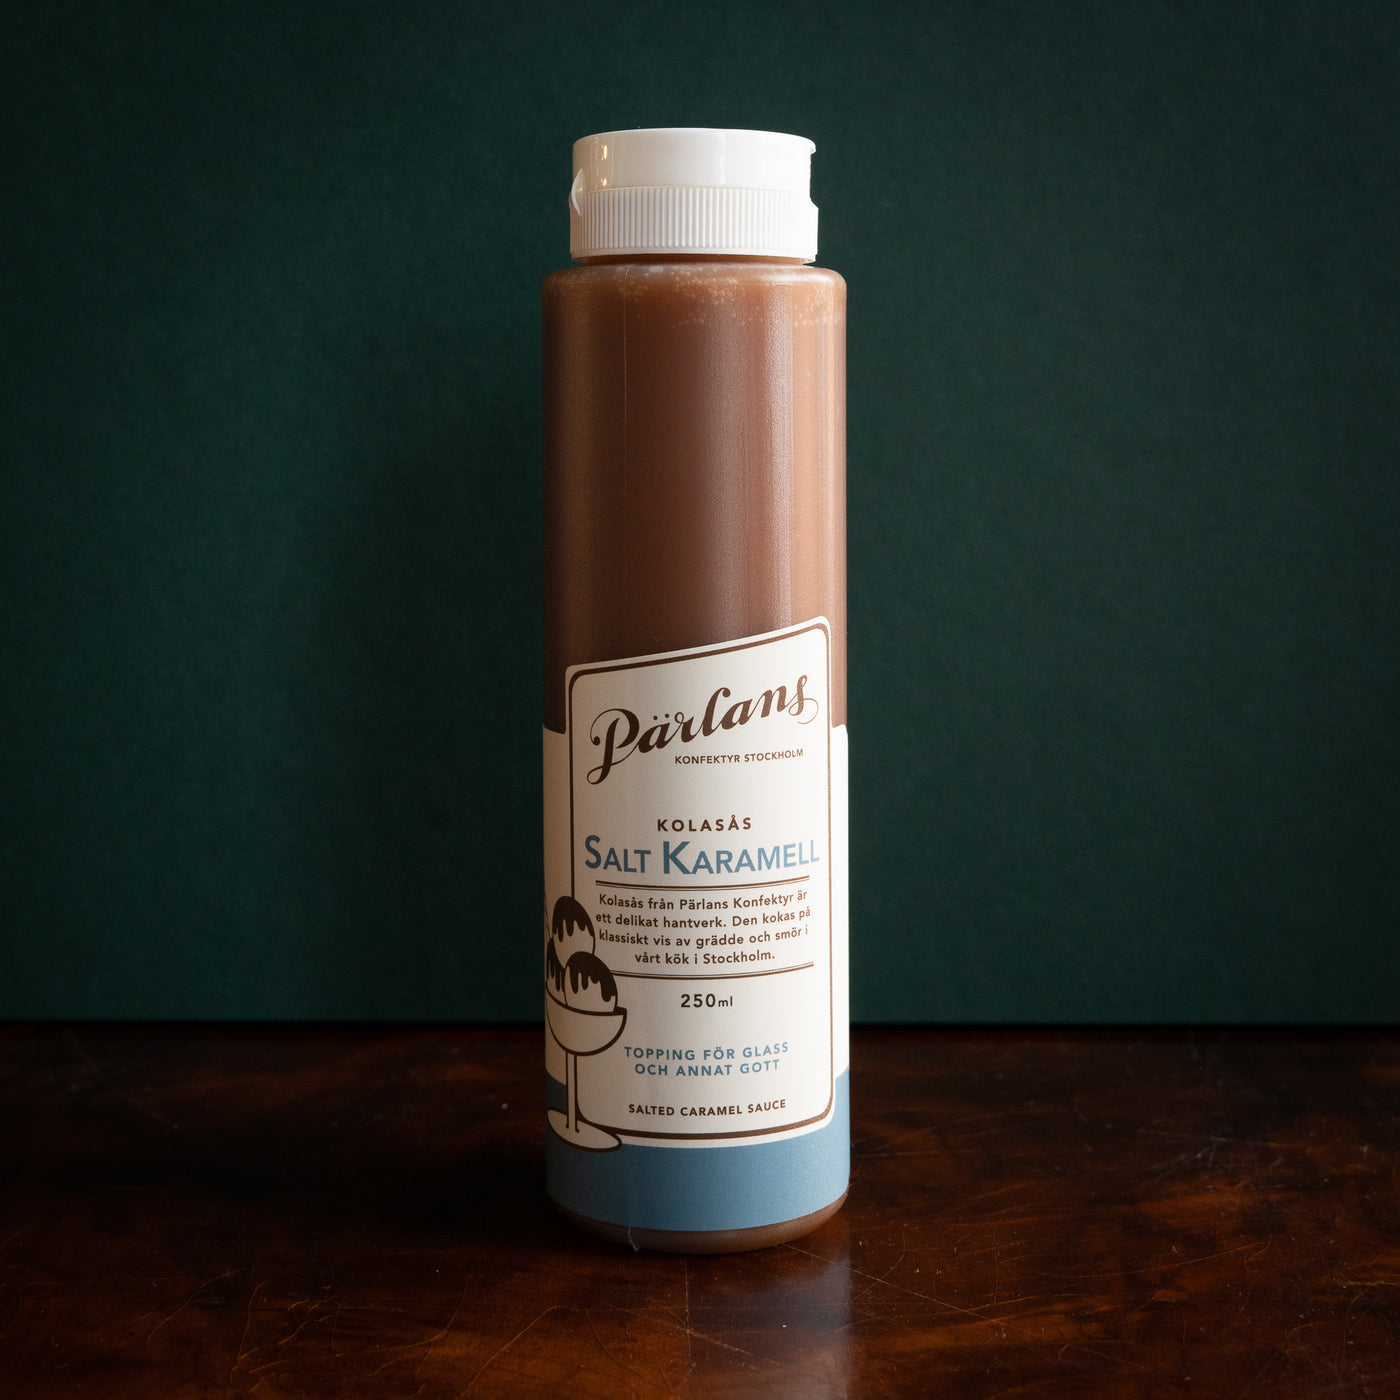 Our delicious caramel sauce in a handy squeeze bottle. Drizzle this glory over ice-cream or your other favourite desserts.<br><br>SALTED CARAMEL –Impossibly creamy and buttery, this sauce epitomises the glory of caramel. With a generous pinch of sea salt that tastes like more-more-more.